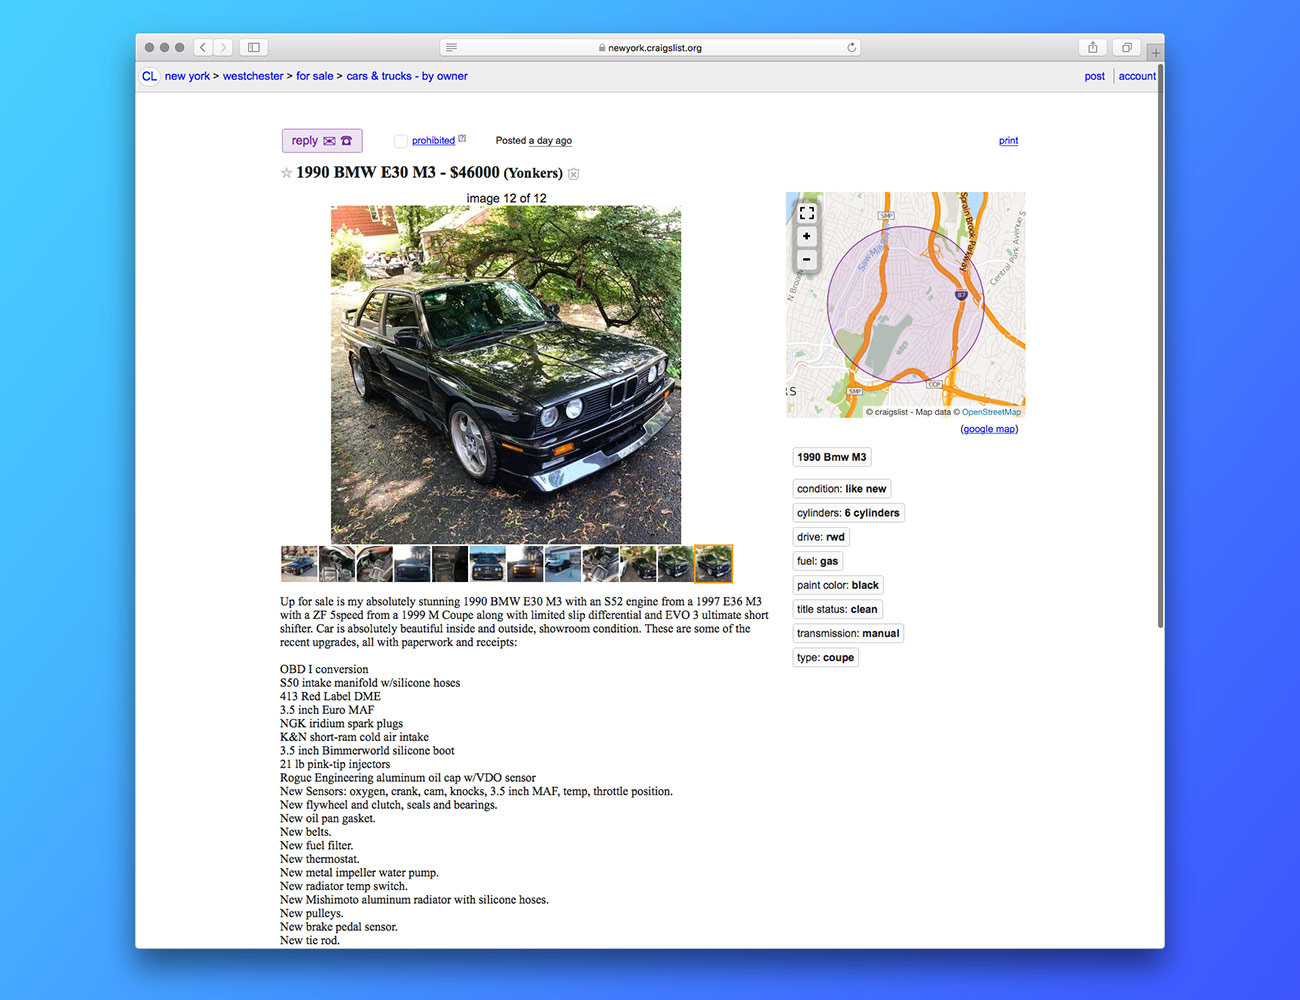 How to Sell a Used Car On Craigslist